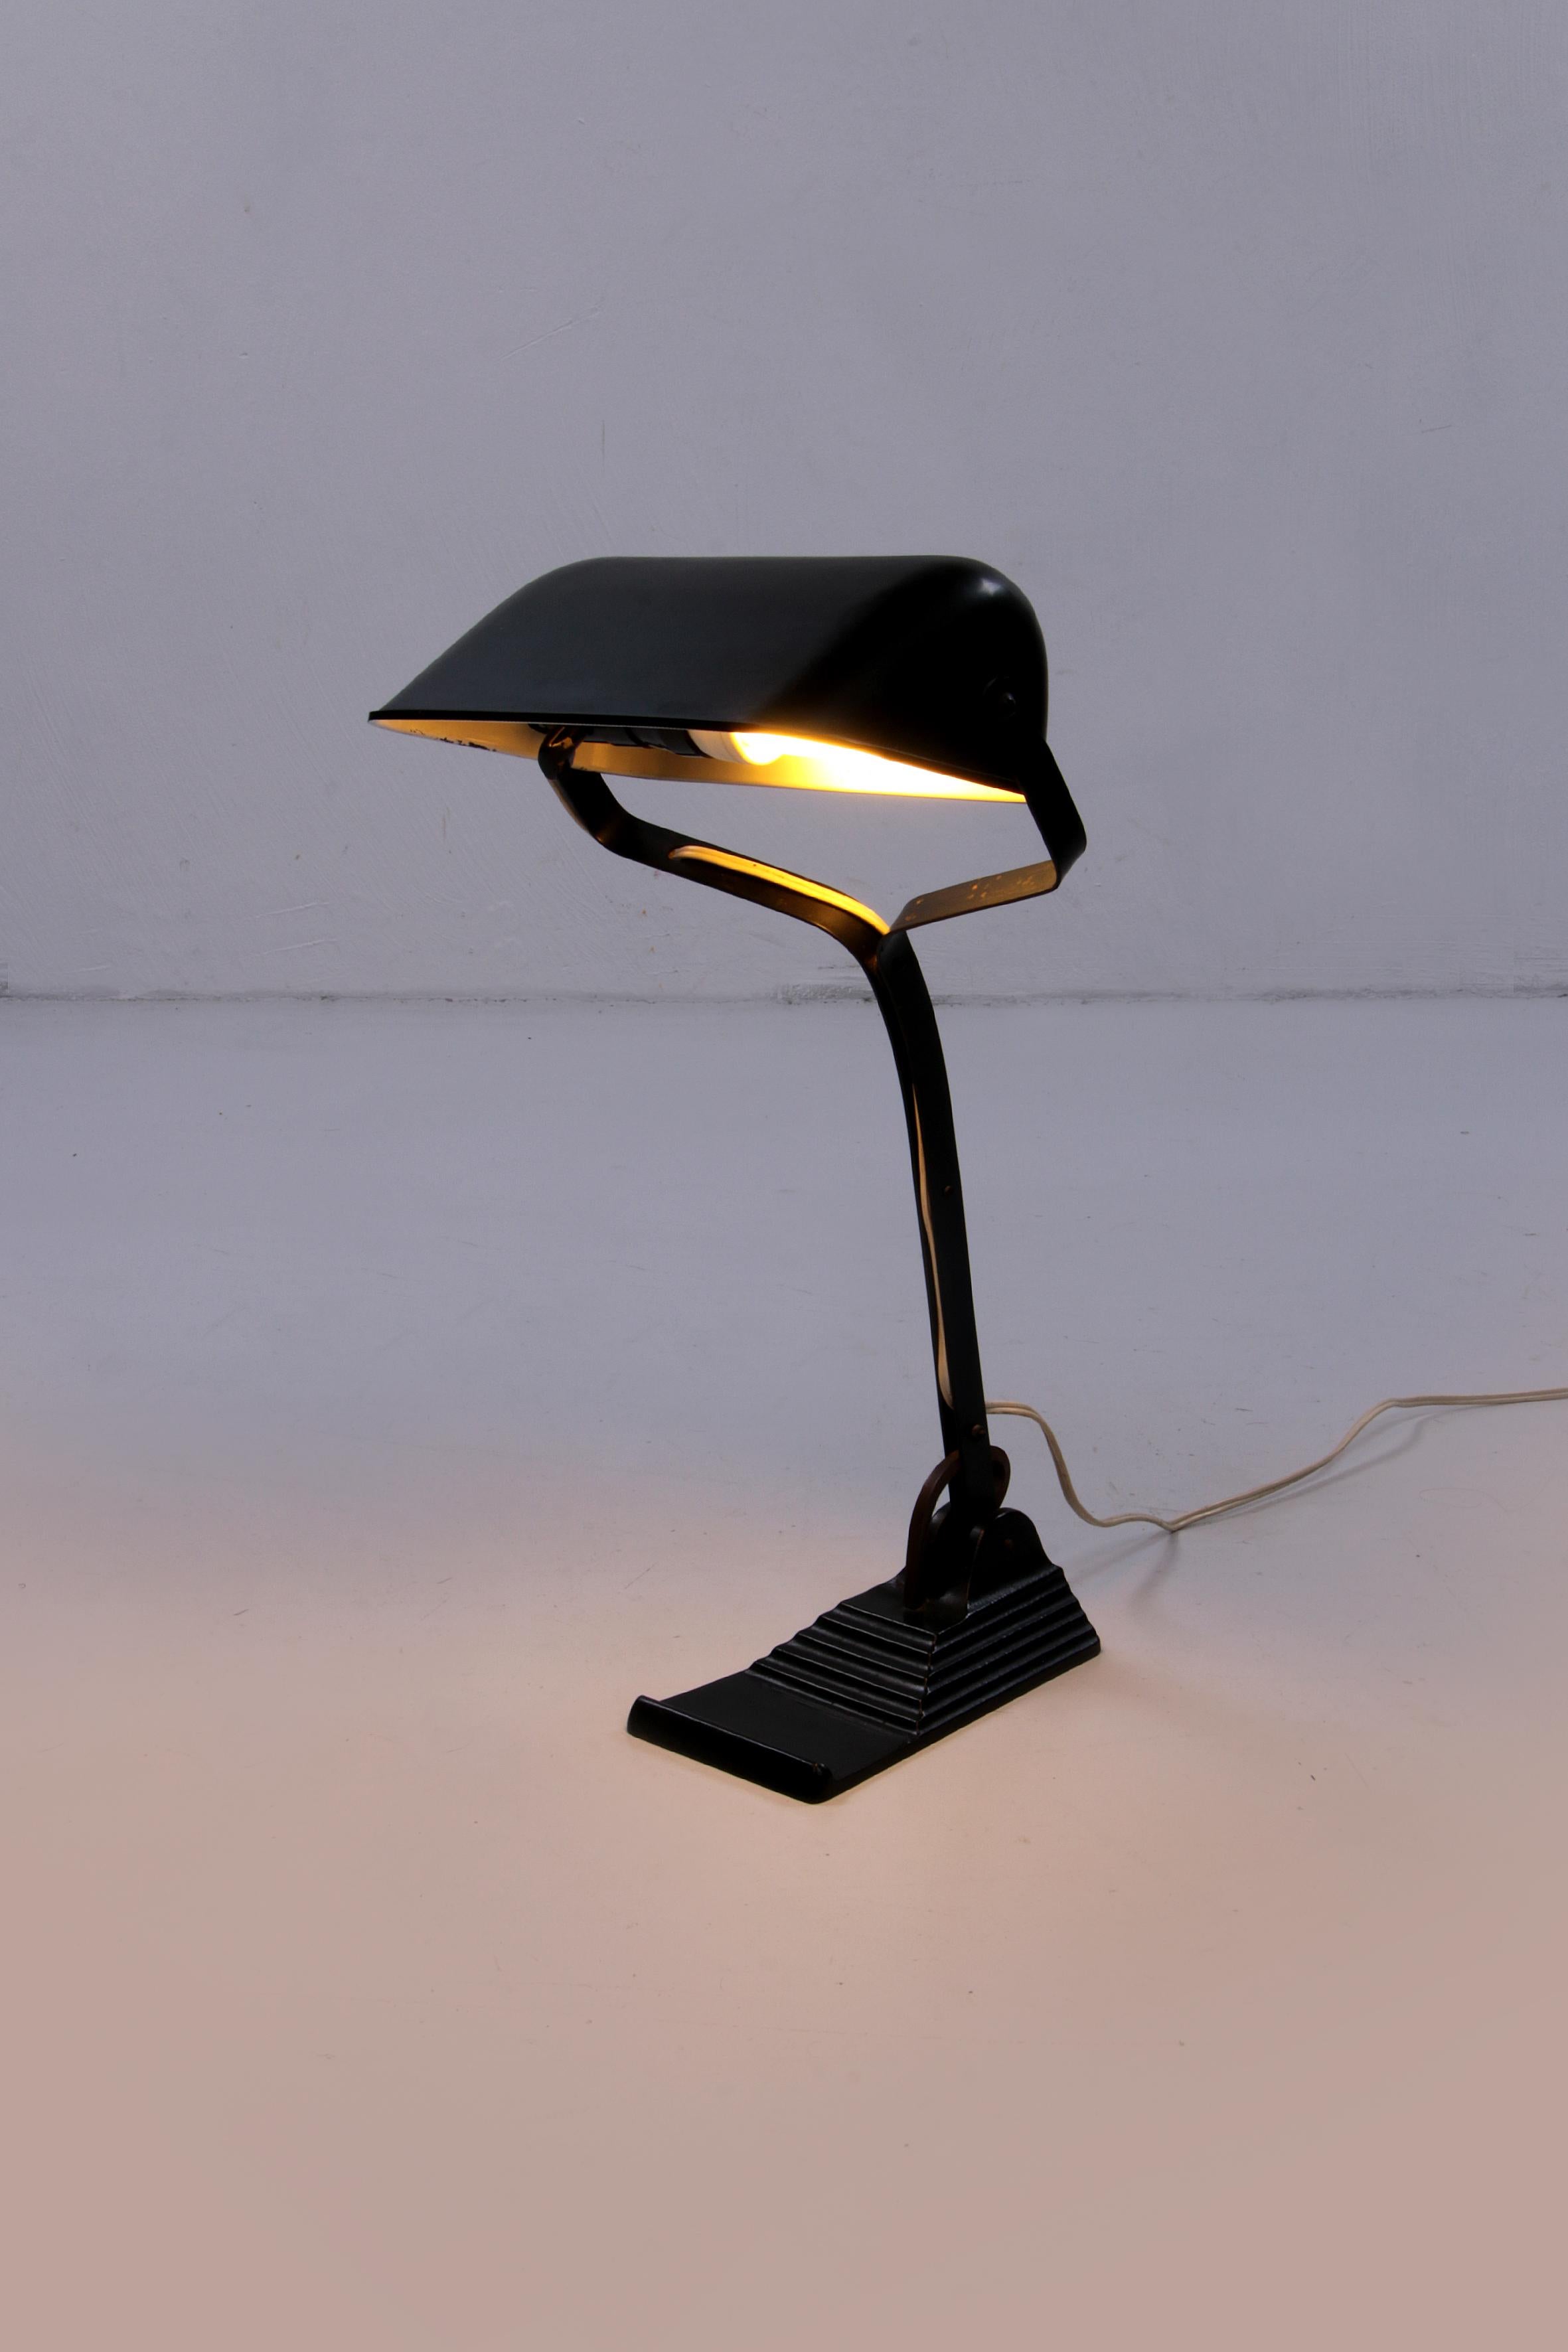 Belgian Art Deco desk lamp also called (notary lamp) made by Erpe Belgium.